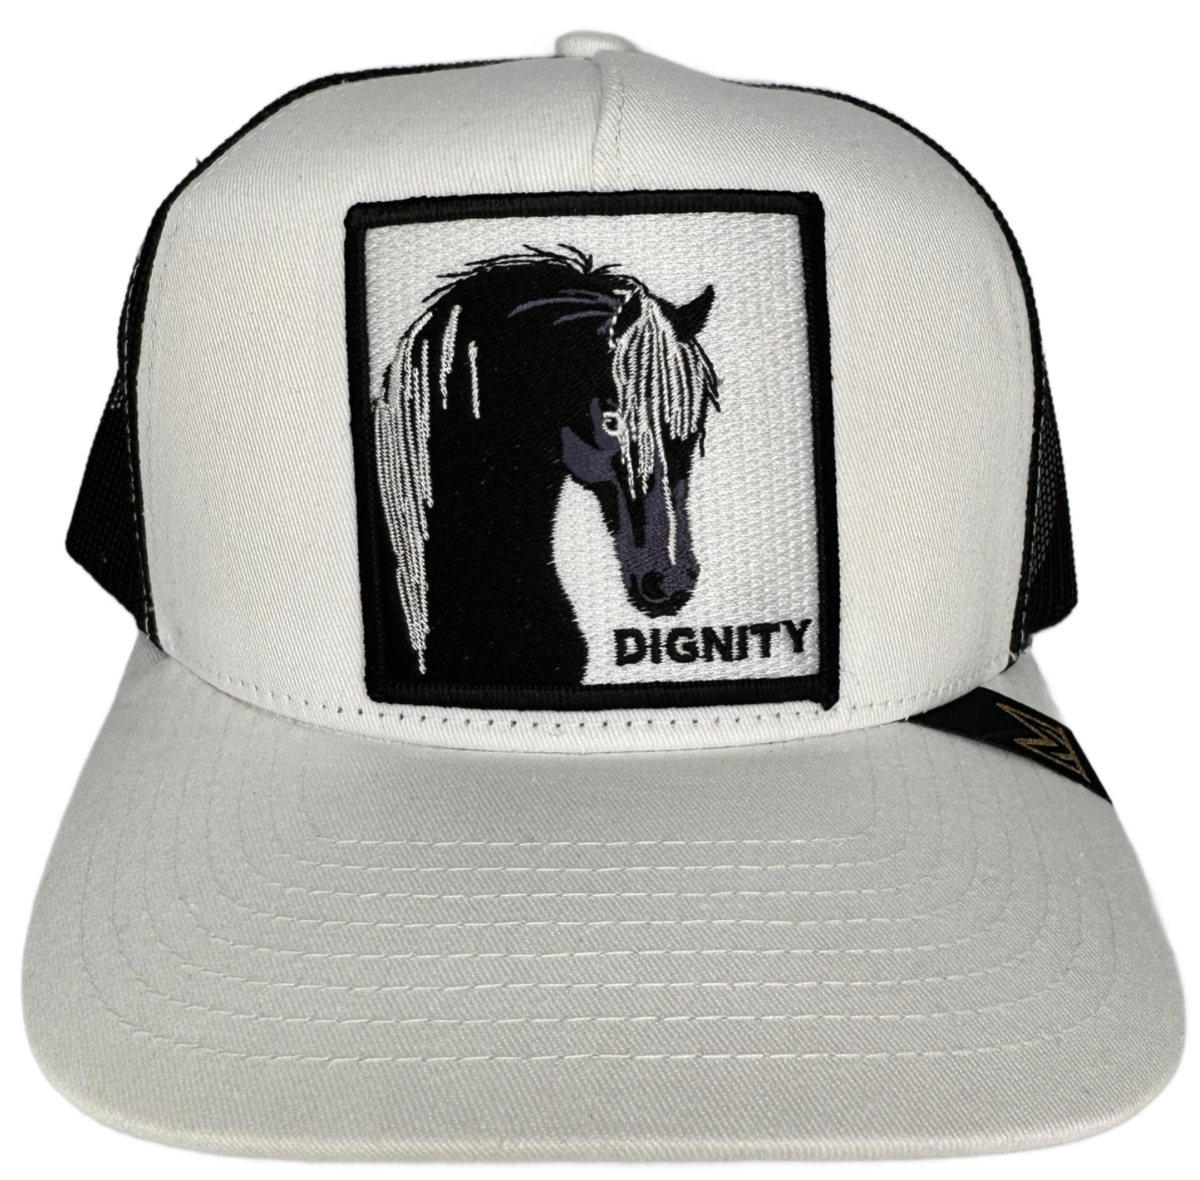 Dignity - White